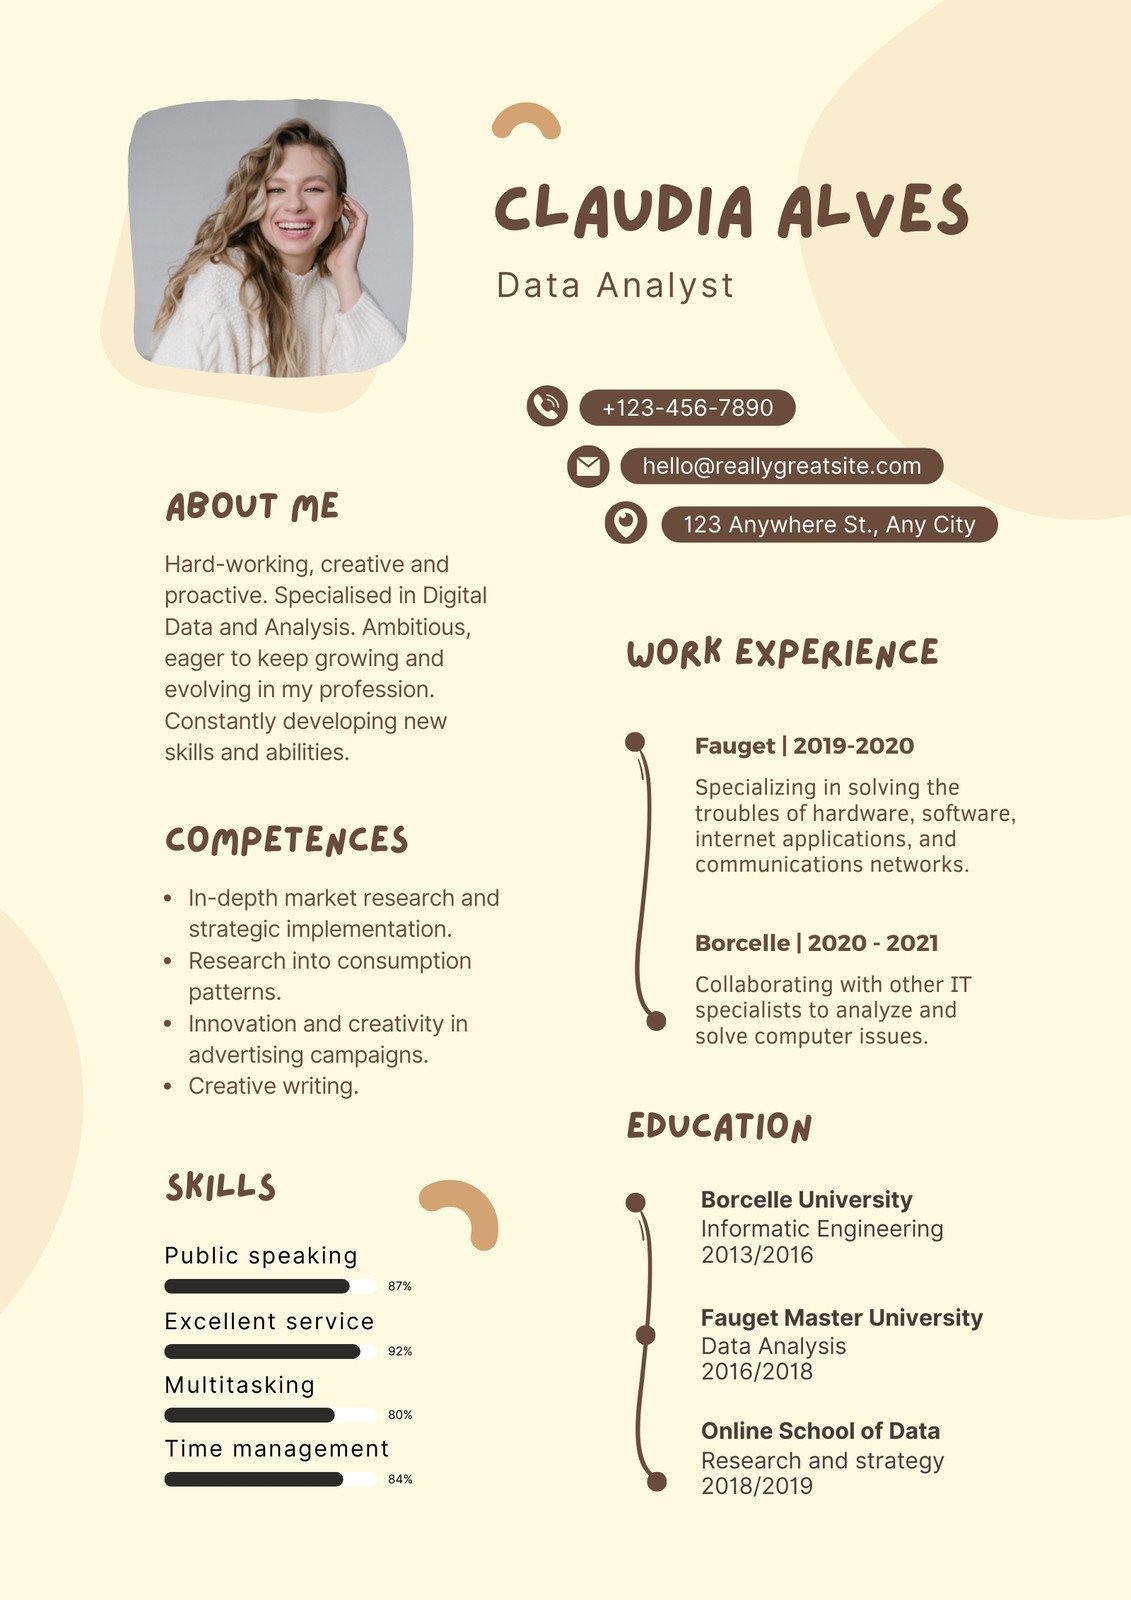 infographic resume images format converter